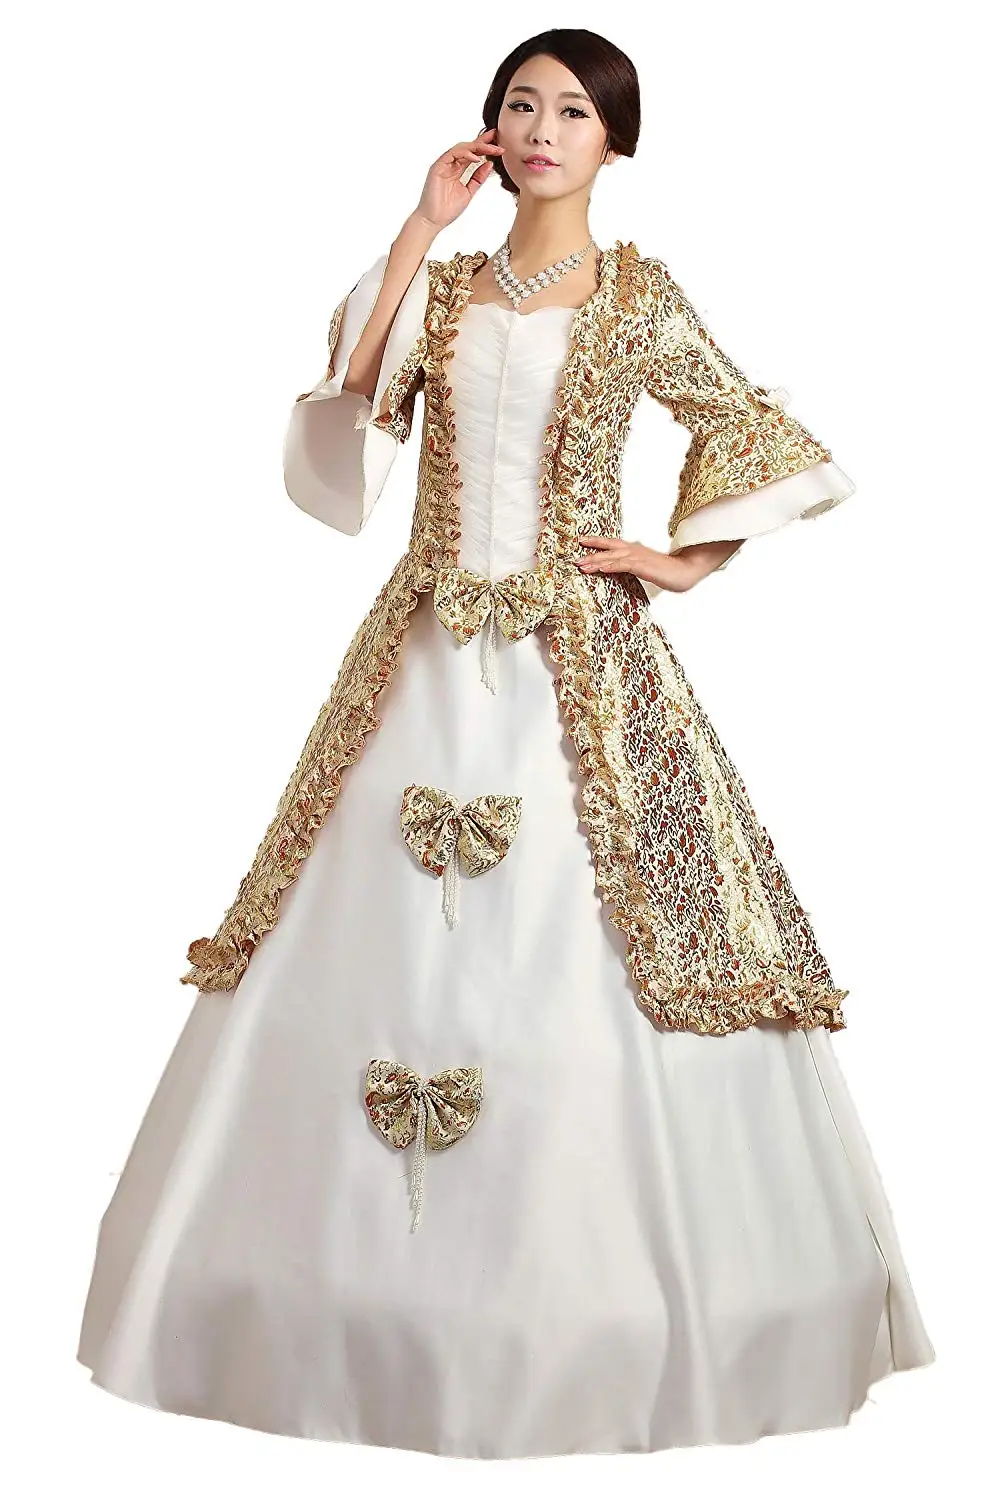 KEMAO 18th Century Dress Medieval Ball Gown Cosplay Victorian Prom Costumes